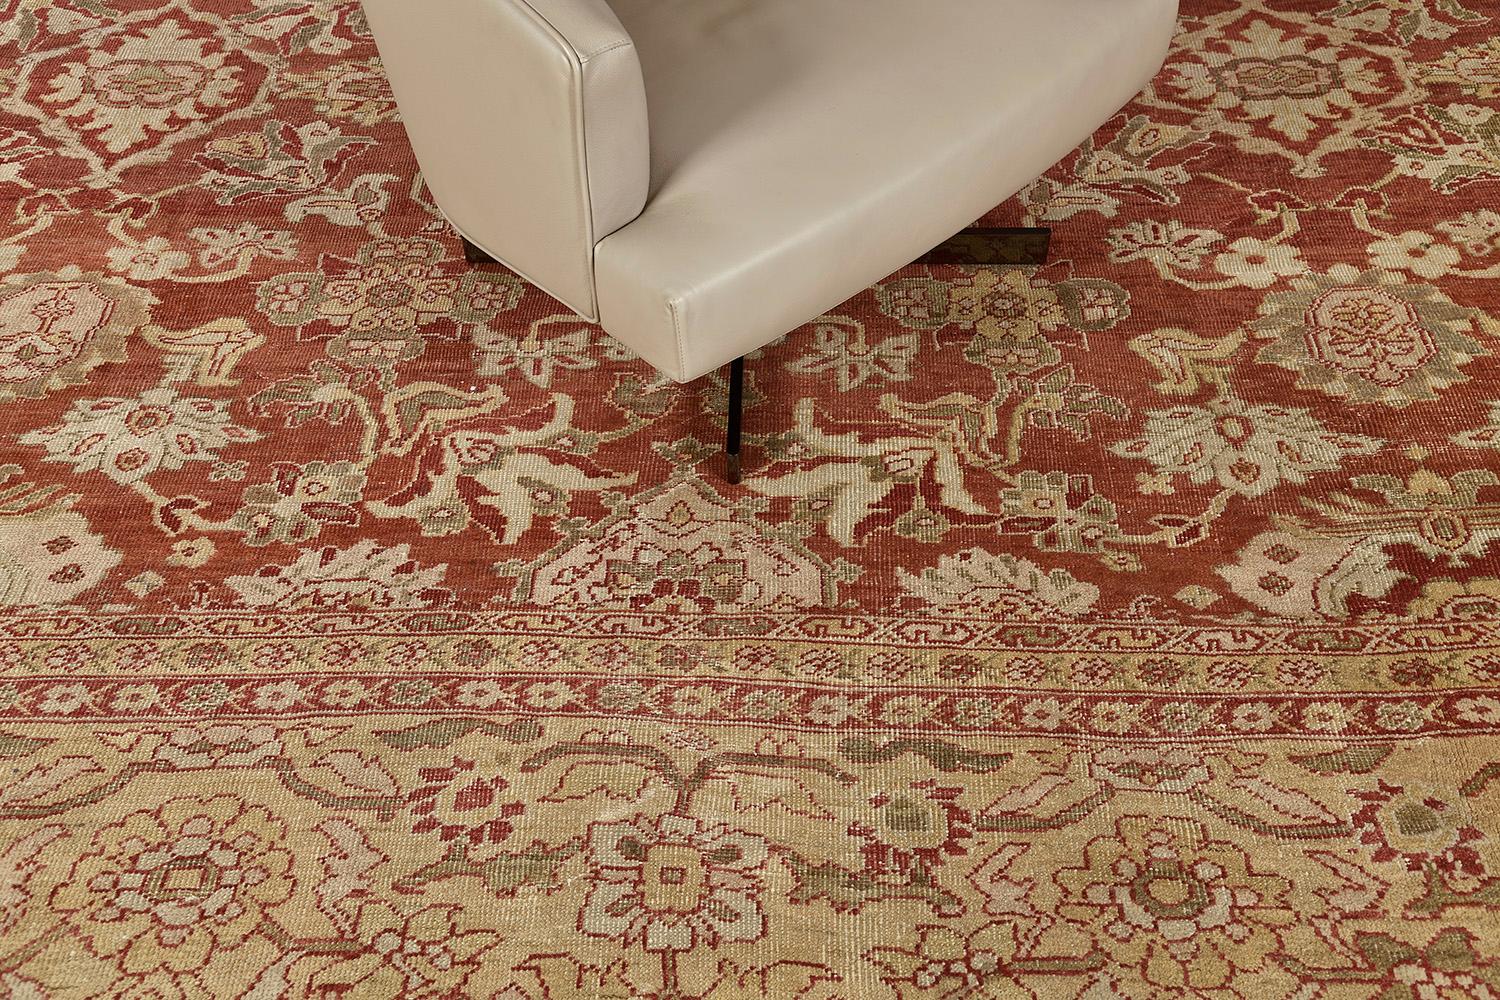 Classy yet gorgeous. This will never be a terrible choice to style your home with our Antique Persian Sultanabad Rug. Vibrantly designed with gold-outlined medallions and florid elements over a blushing field. Gorgeously, it makes the rug more